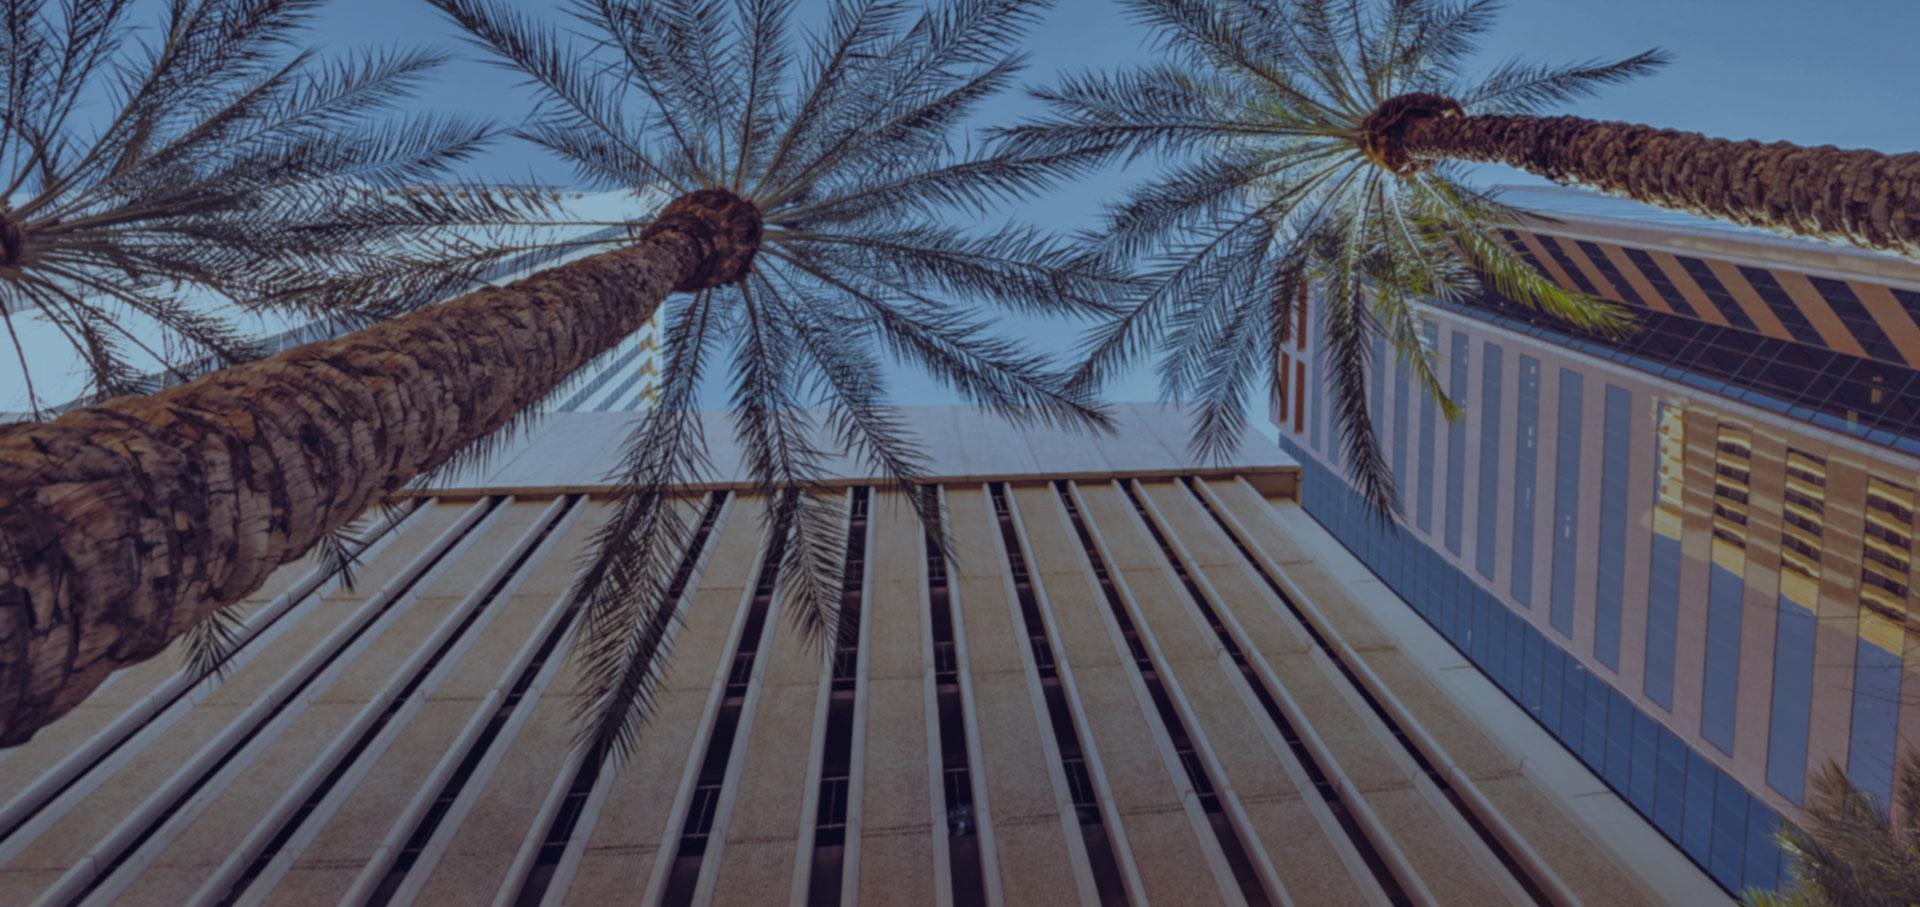 Phoenix palm trees by building